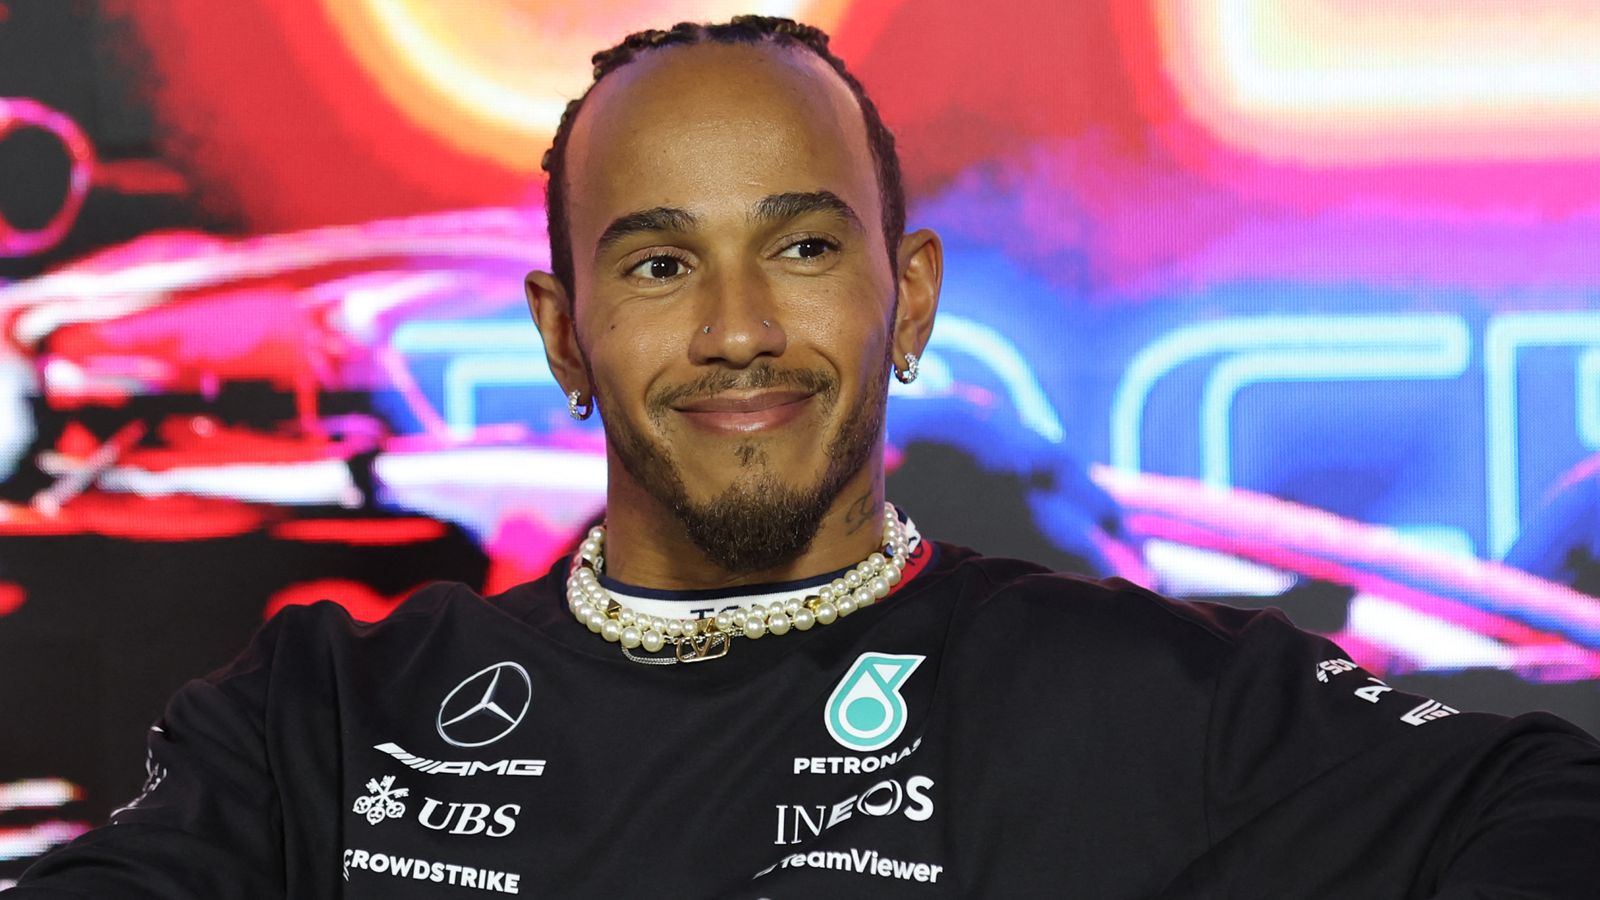 Lewis Hamilton to leave Mercedes after 'amazing 11 years' and move to  Ferrari, UK News